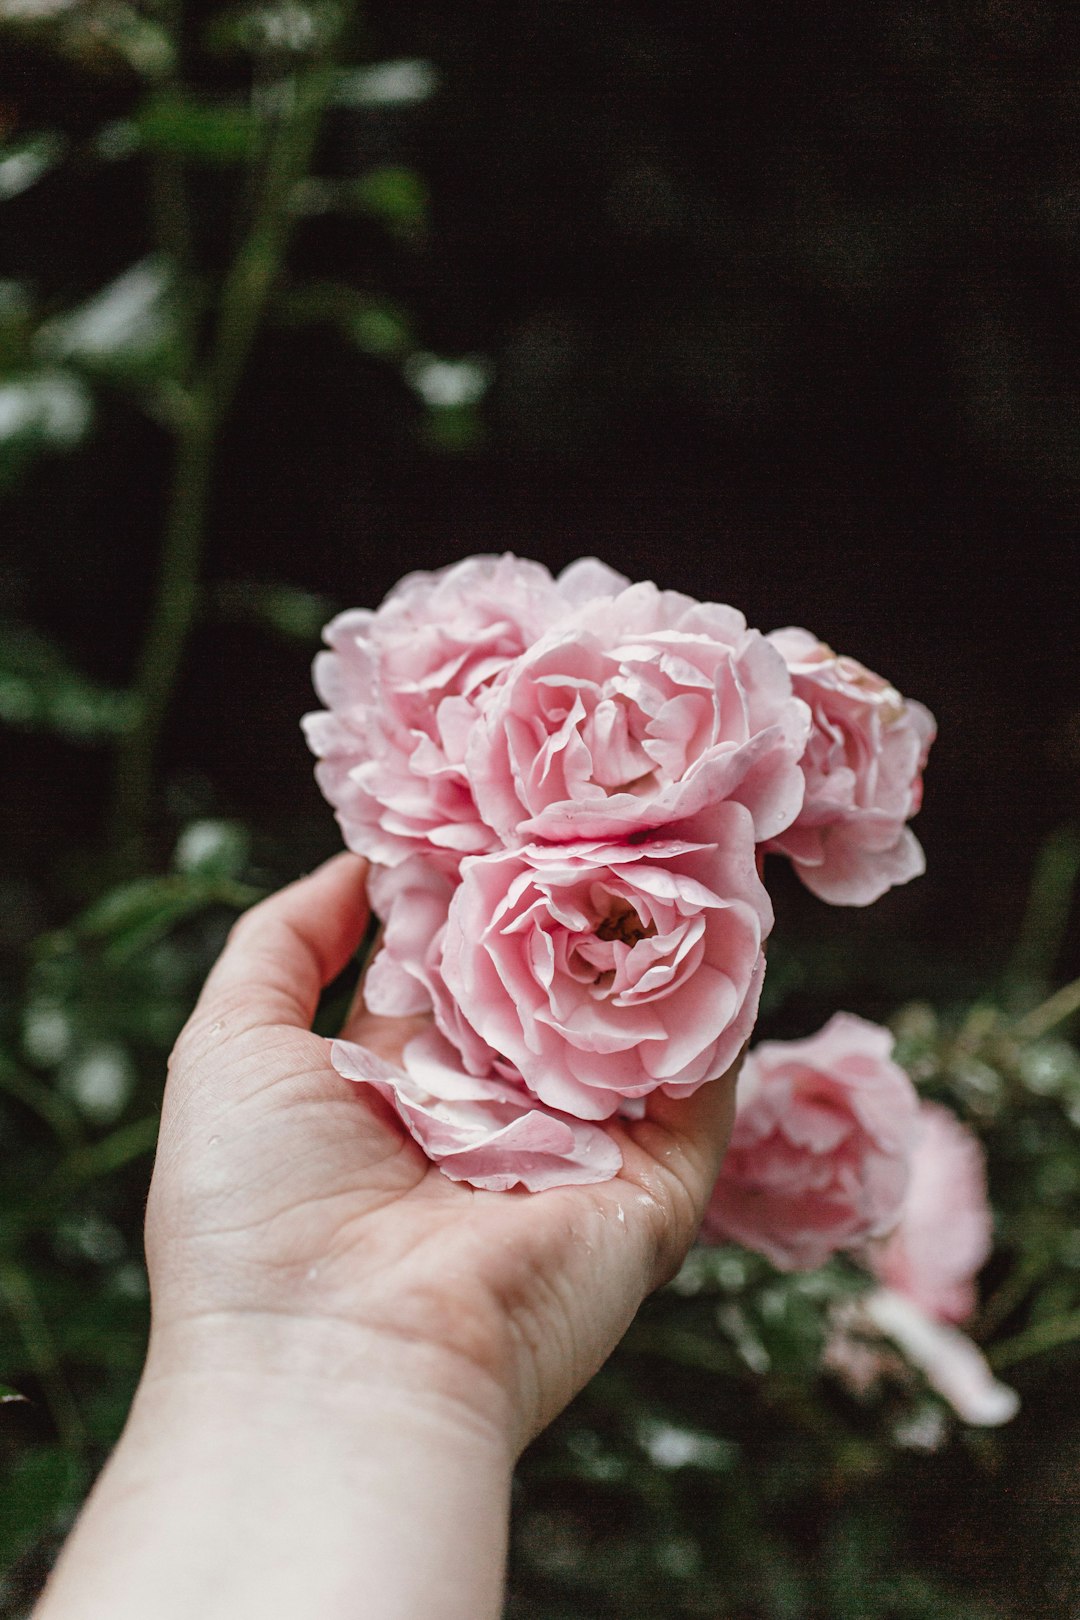 person holding pink rose in bloom during daytime